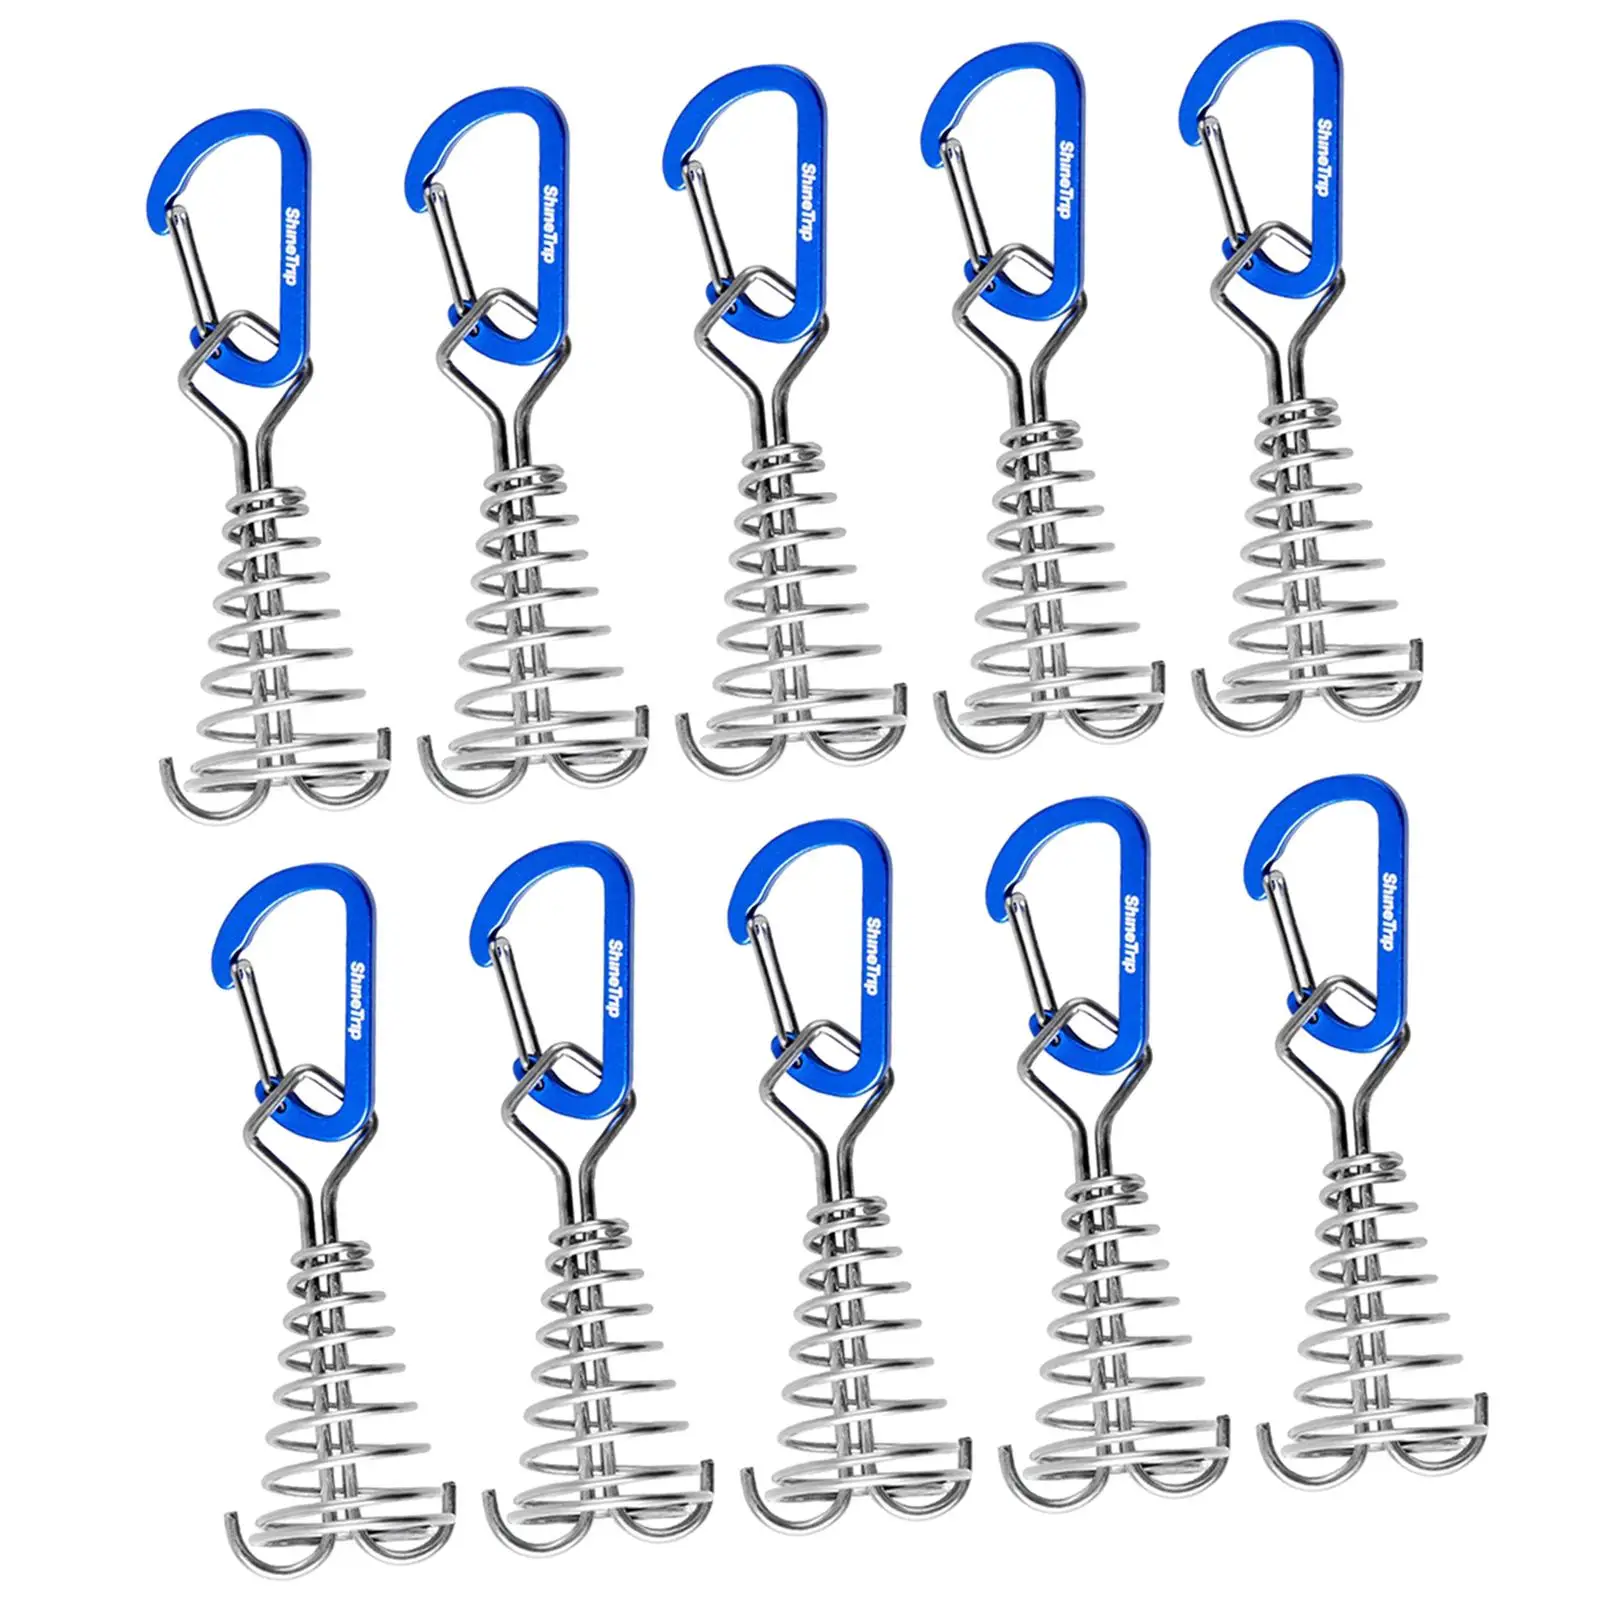 10 Pieces Deck Anchor Pegs with Spring Buckle, Portable Windproof Tent Rope Tightener for Outdoor Hiking